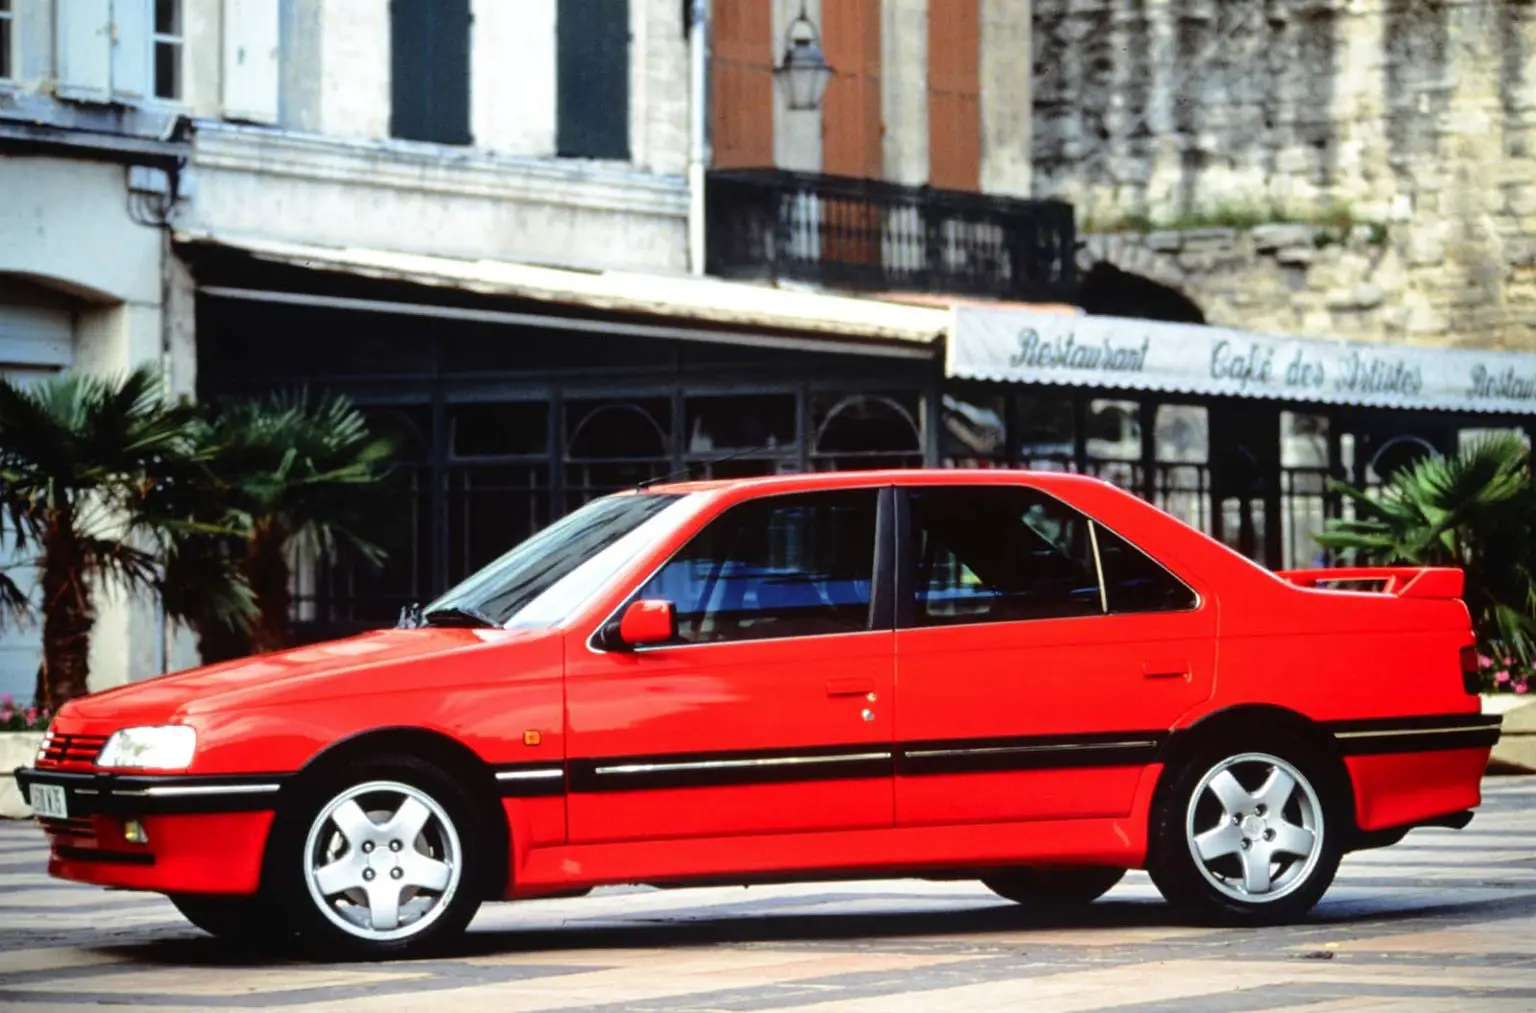 Peugeot 405 T16, Four Wheel Drive, Turbocharged, Overboost And In 1993